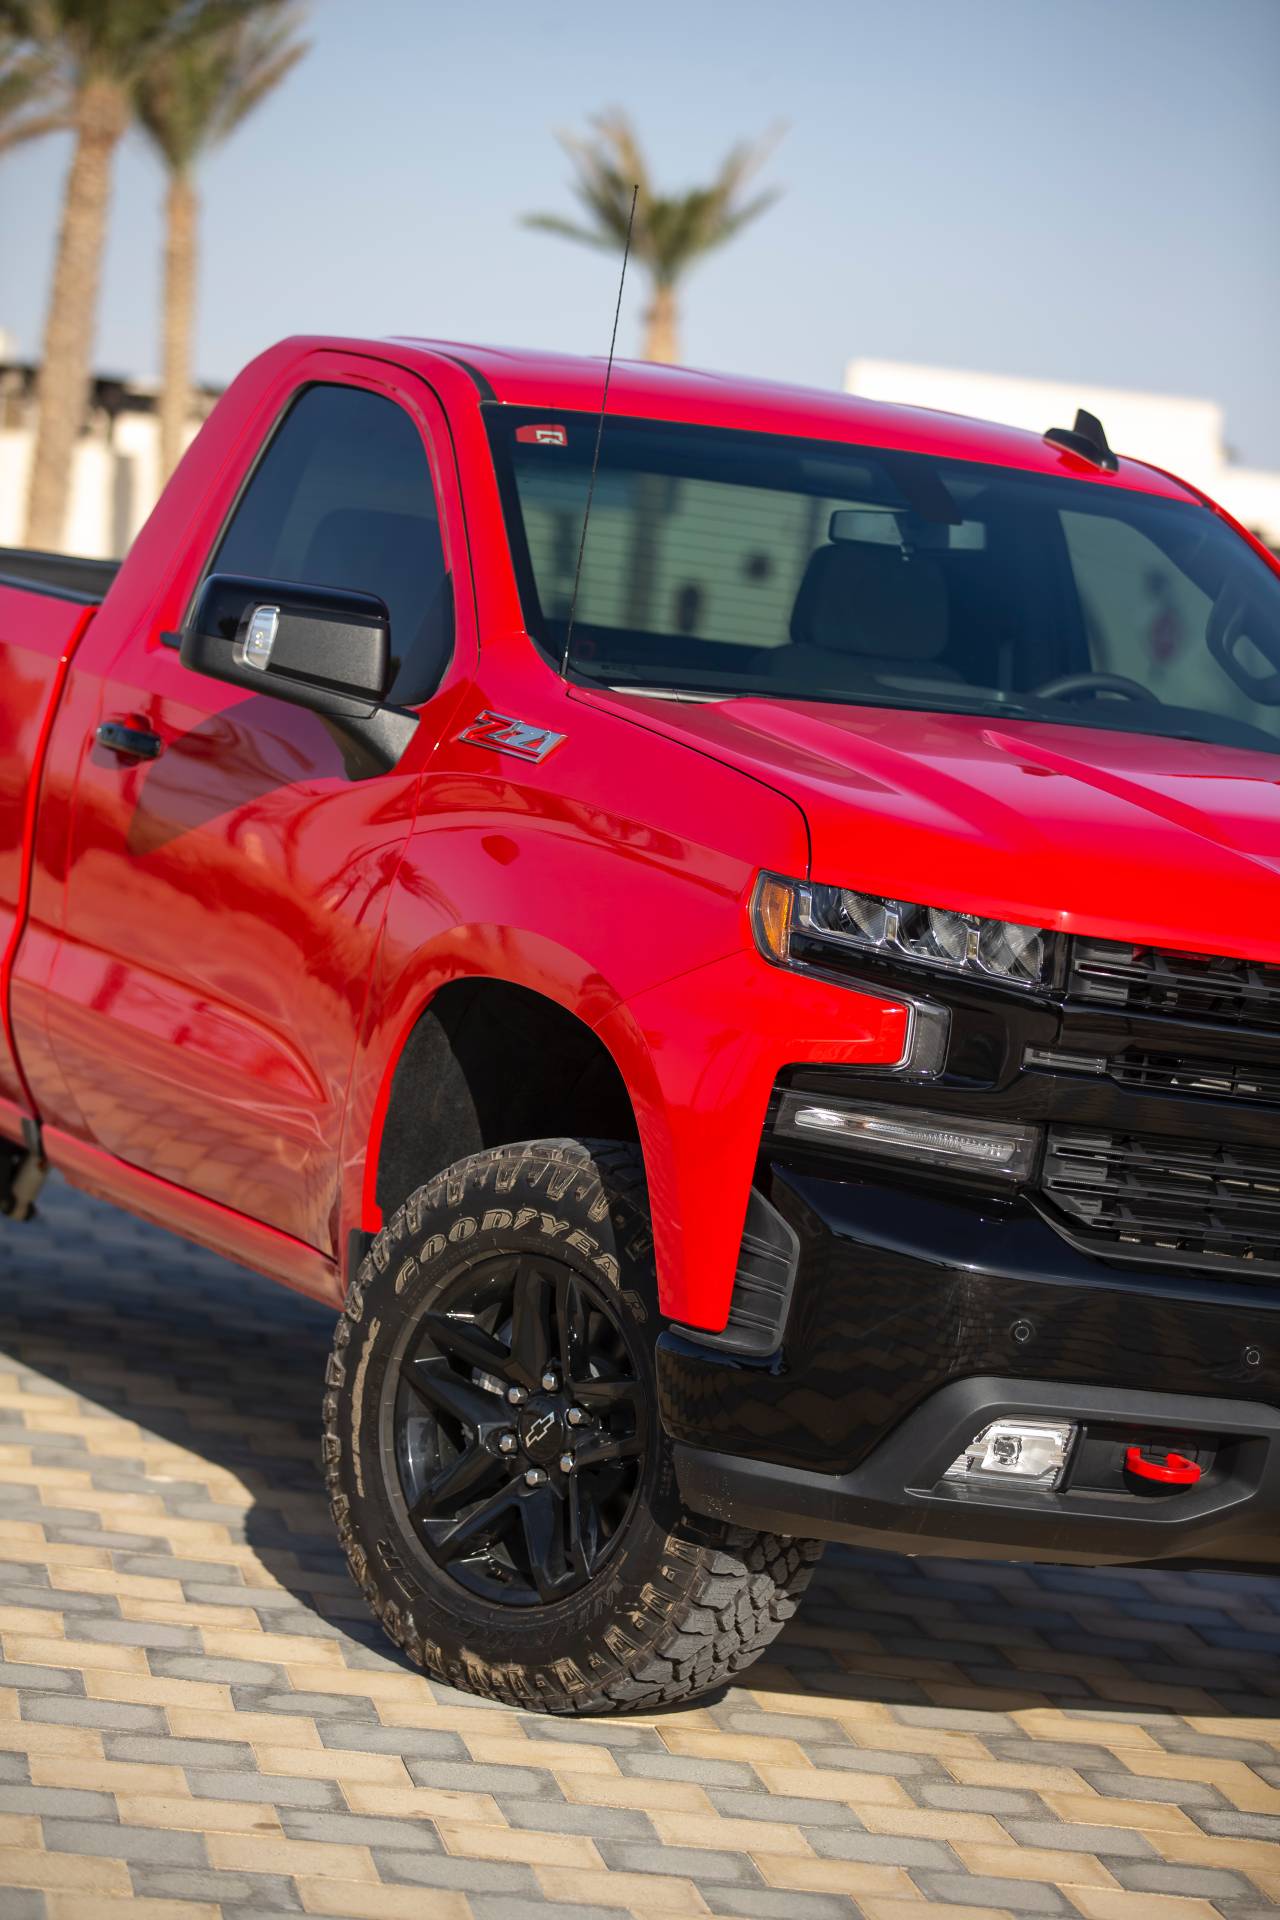 Chevrolet Silverado Electric Pickup Truck Will Be Joined by 29 Other